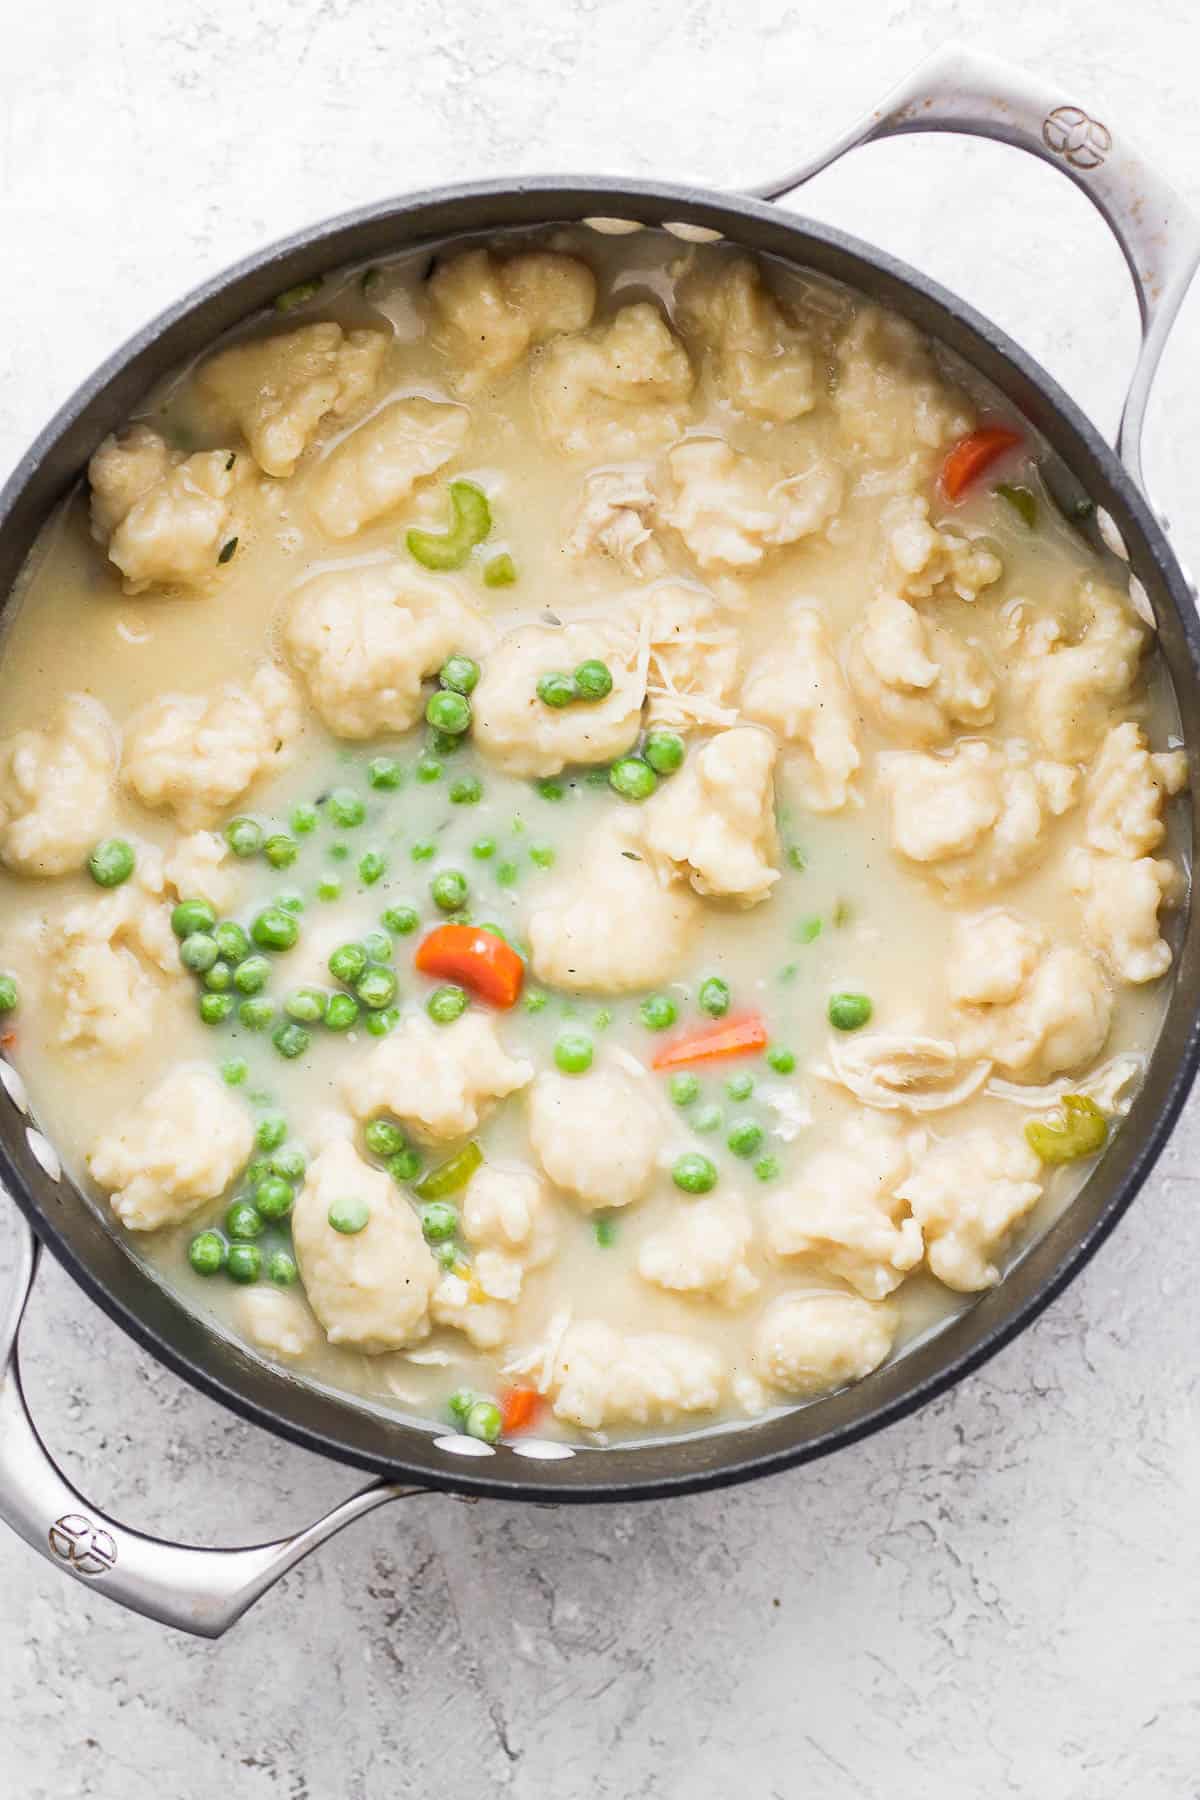 Frozen peas added to the chicken and dumpling soup.